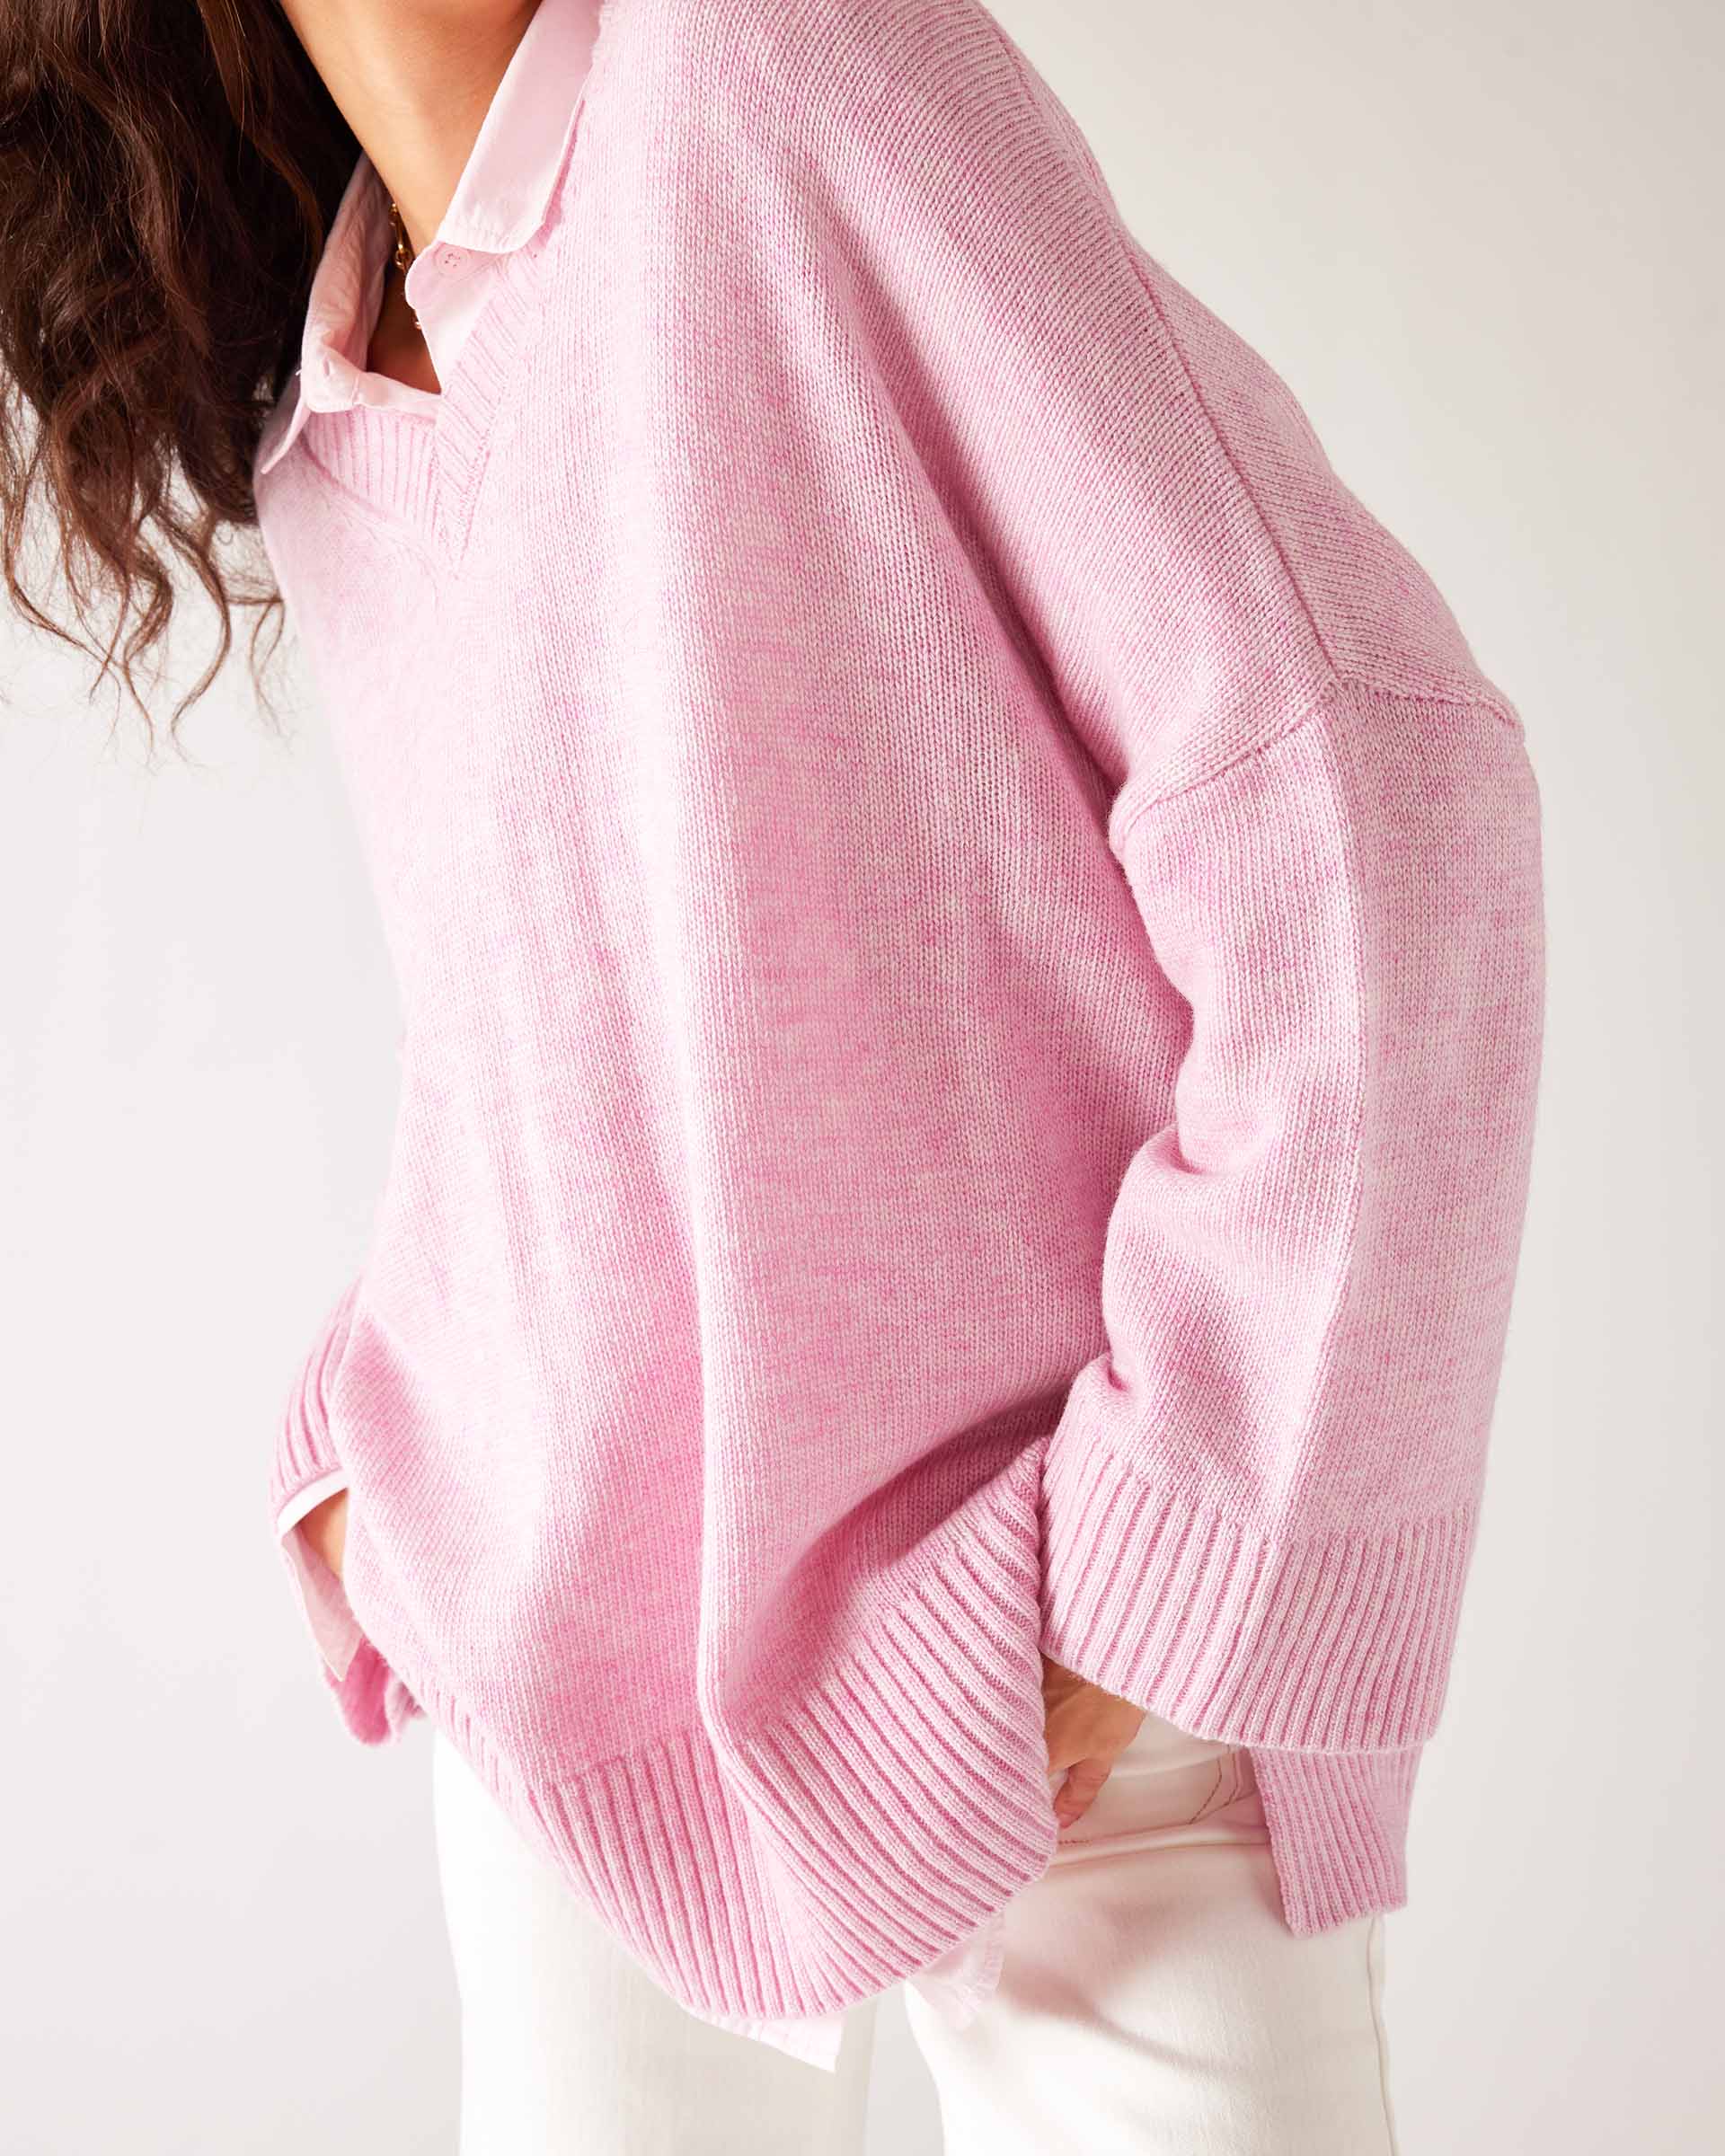 Women's Light Pink Midweight Loose Fitting V-neck Sweater Front View Leaning Forward Hands in Pockets